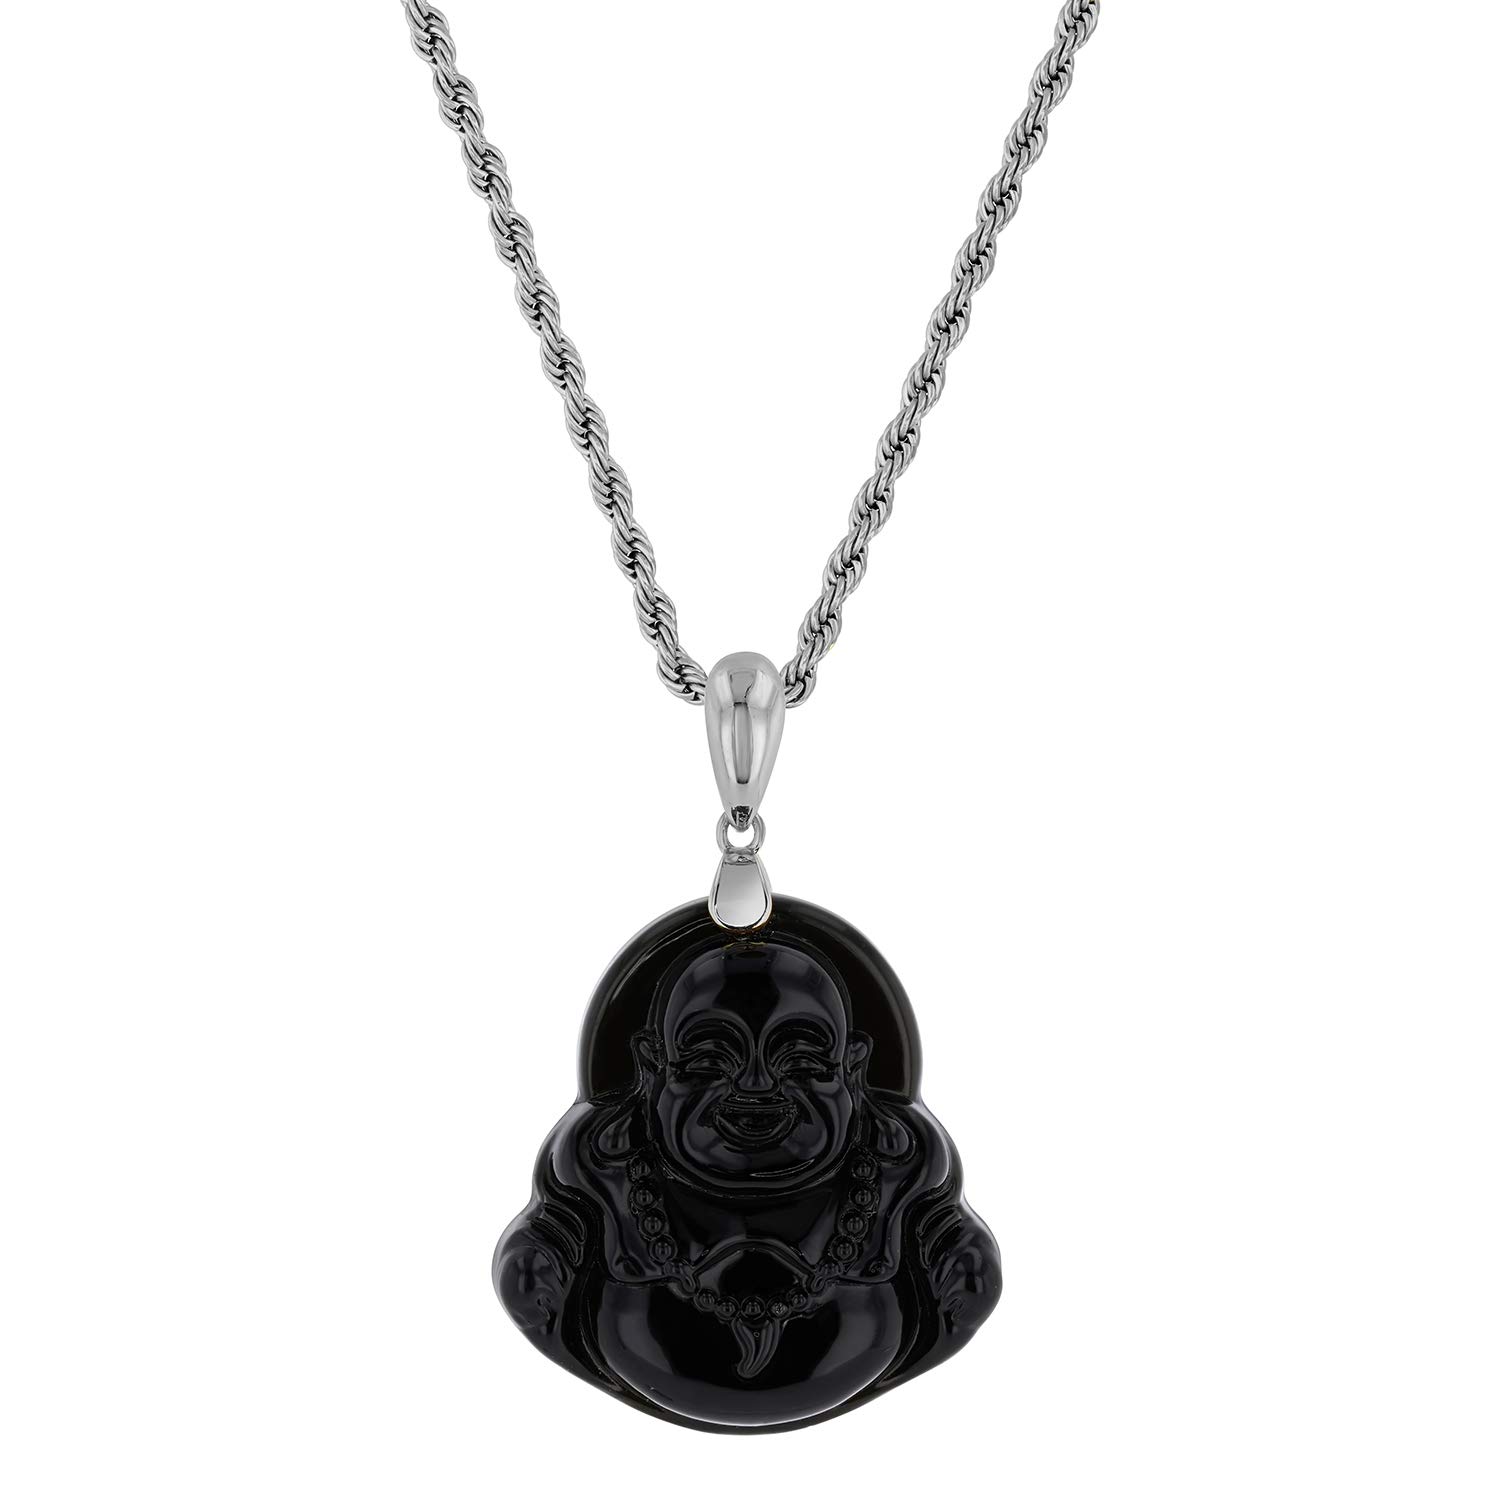 Laughing Buddha Black Jade Pendant Necklace Rope Chain Genuine Certified Grade A Jadeite Jade Hand Crafted, Jade Necklace, 14k White Gold Finish Silver Laughing Jade Buddha Necklace